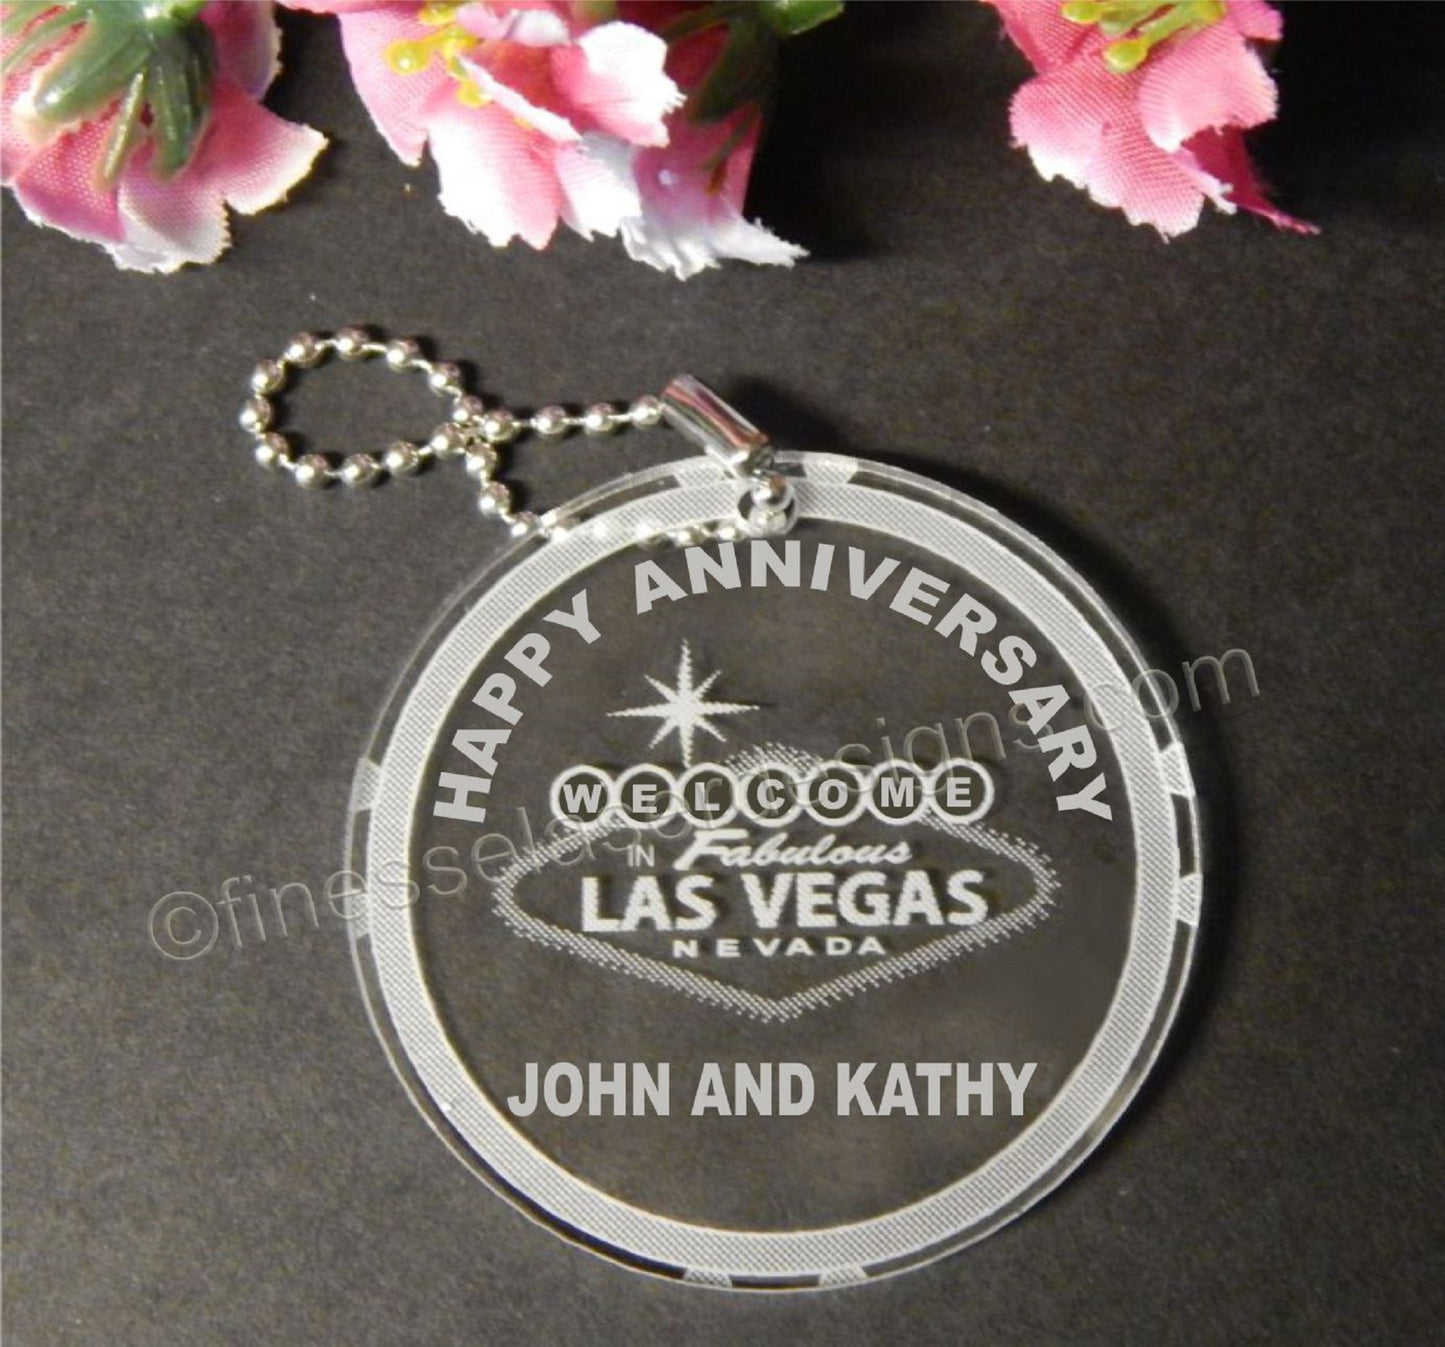 Round acrylic keychain designed with Welcome to Las Vegas sign and Happy Anniversary, along with names